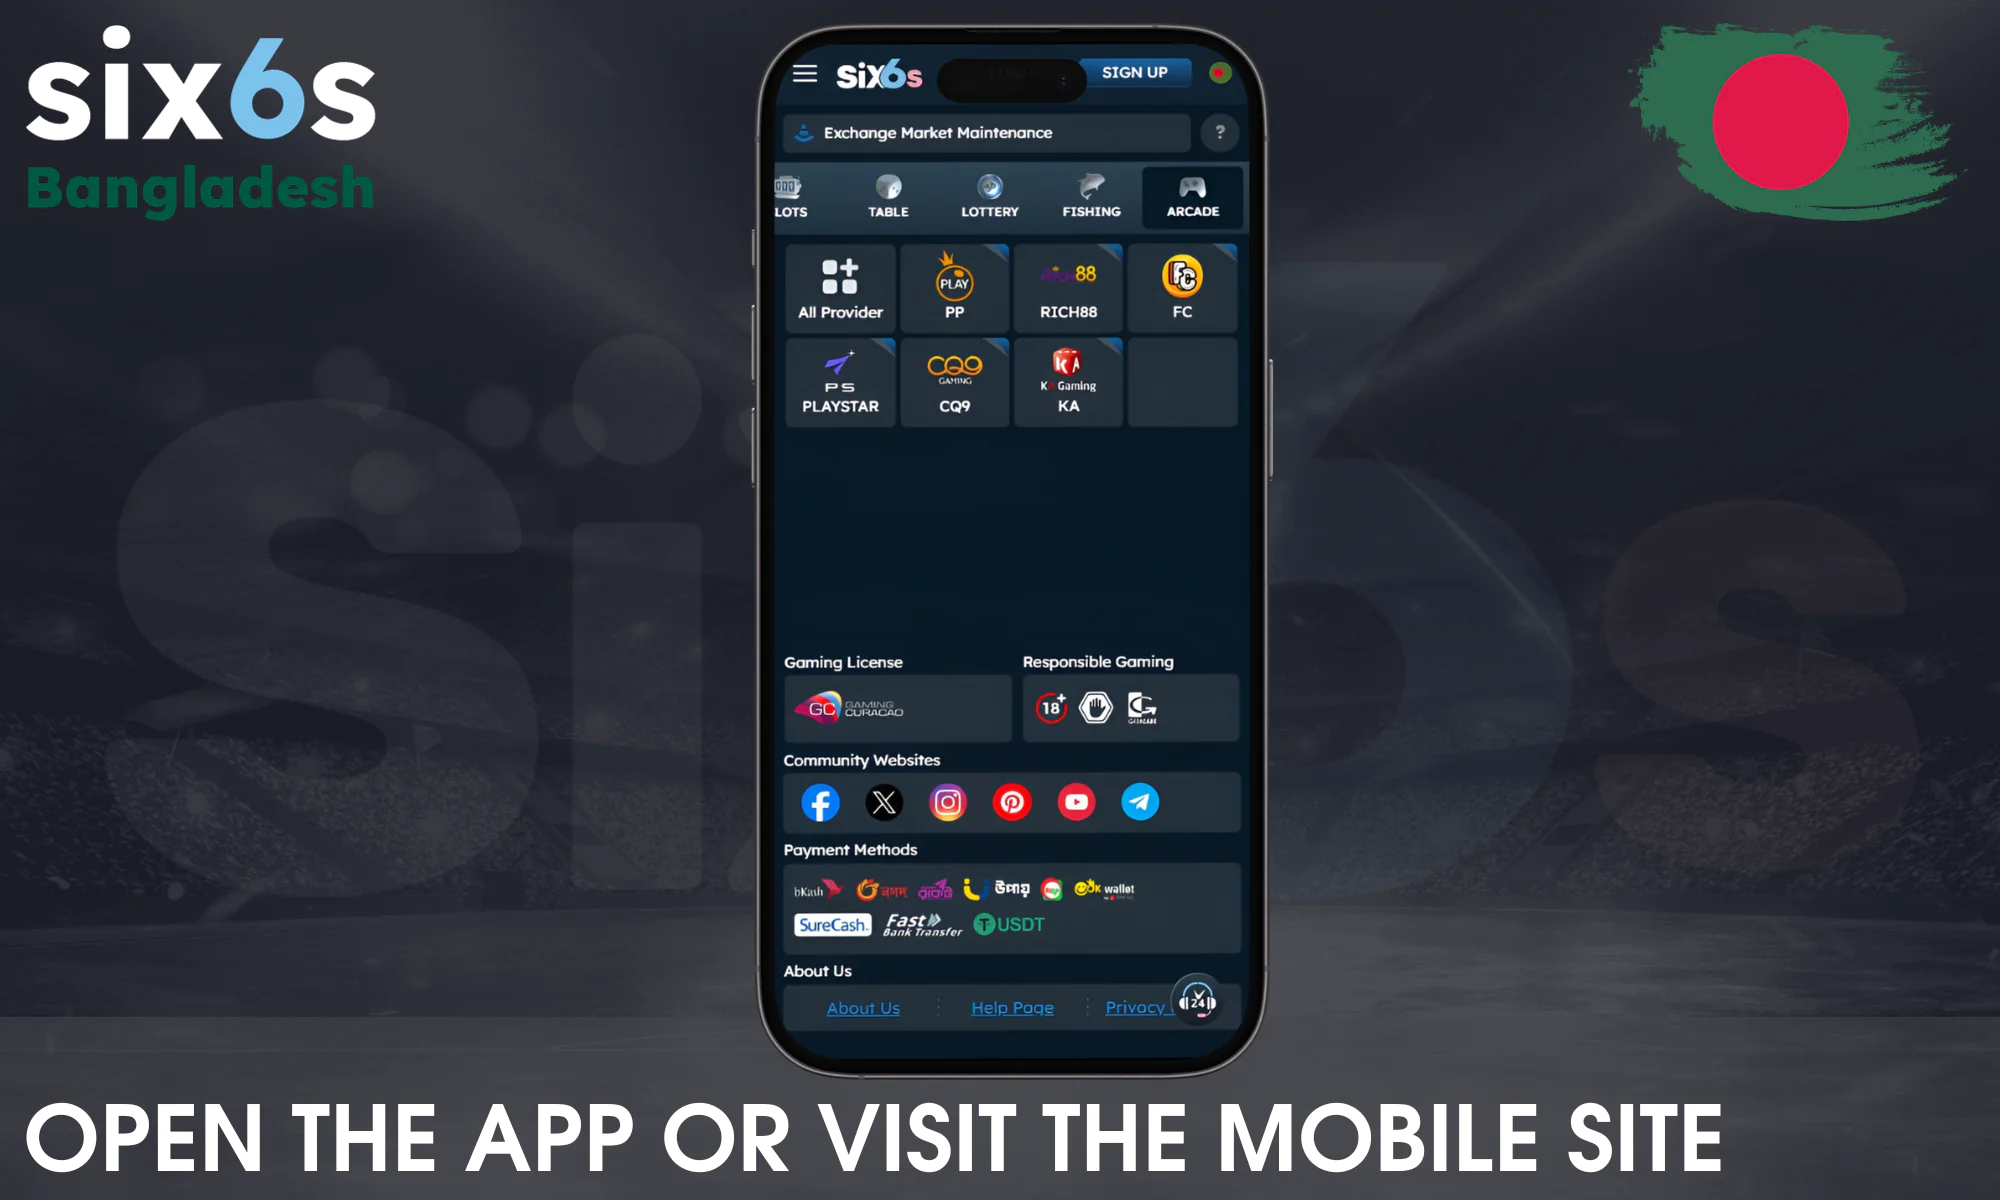 Find the Six6s mobile website or use the app